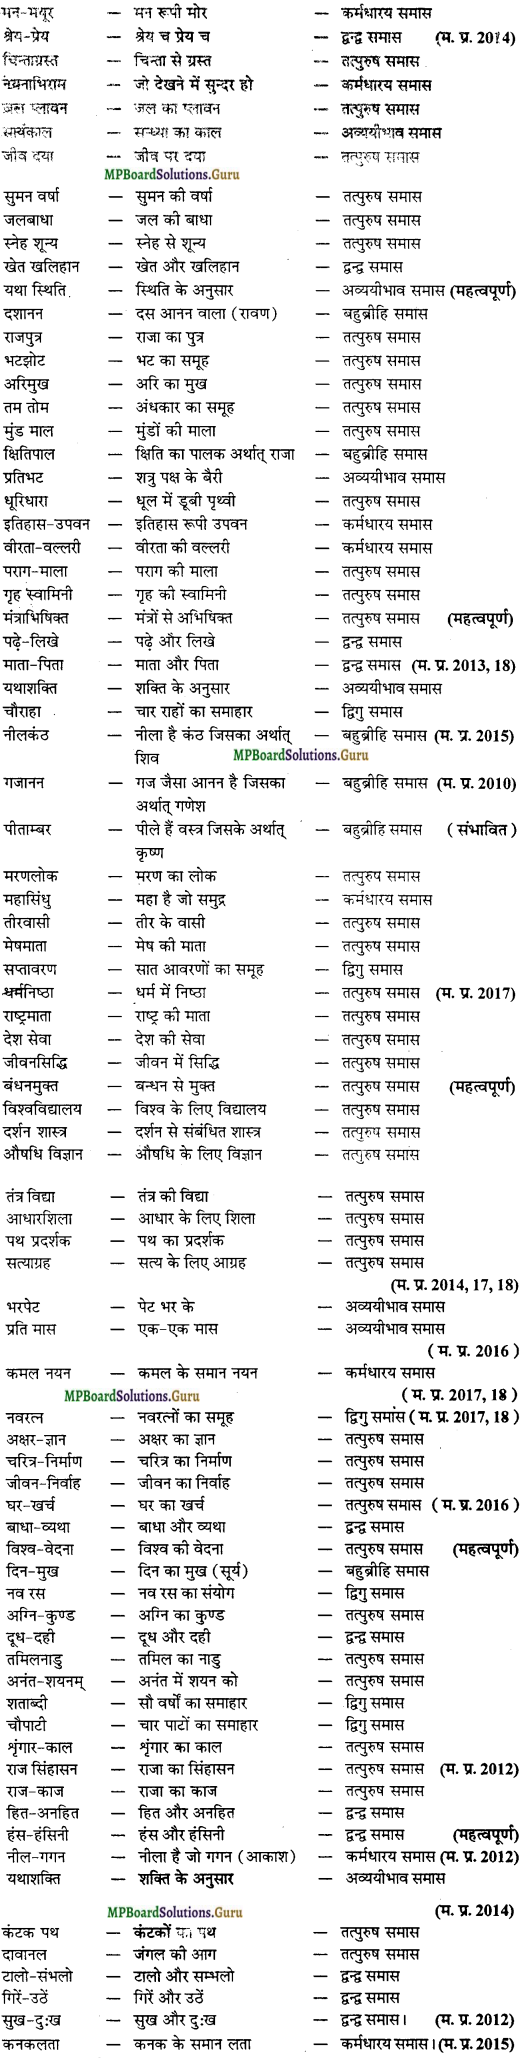 MP Board Class 12th General Hindi व्याकरण Important Questions img 3